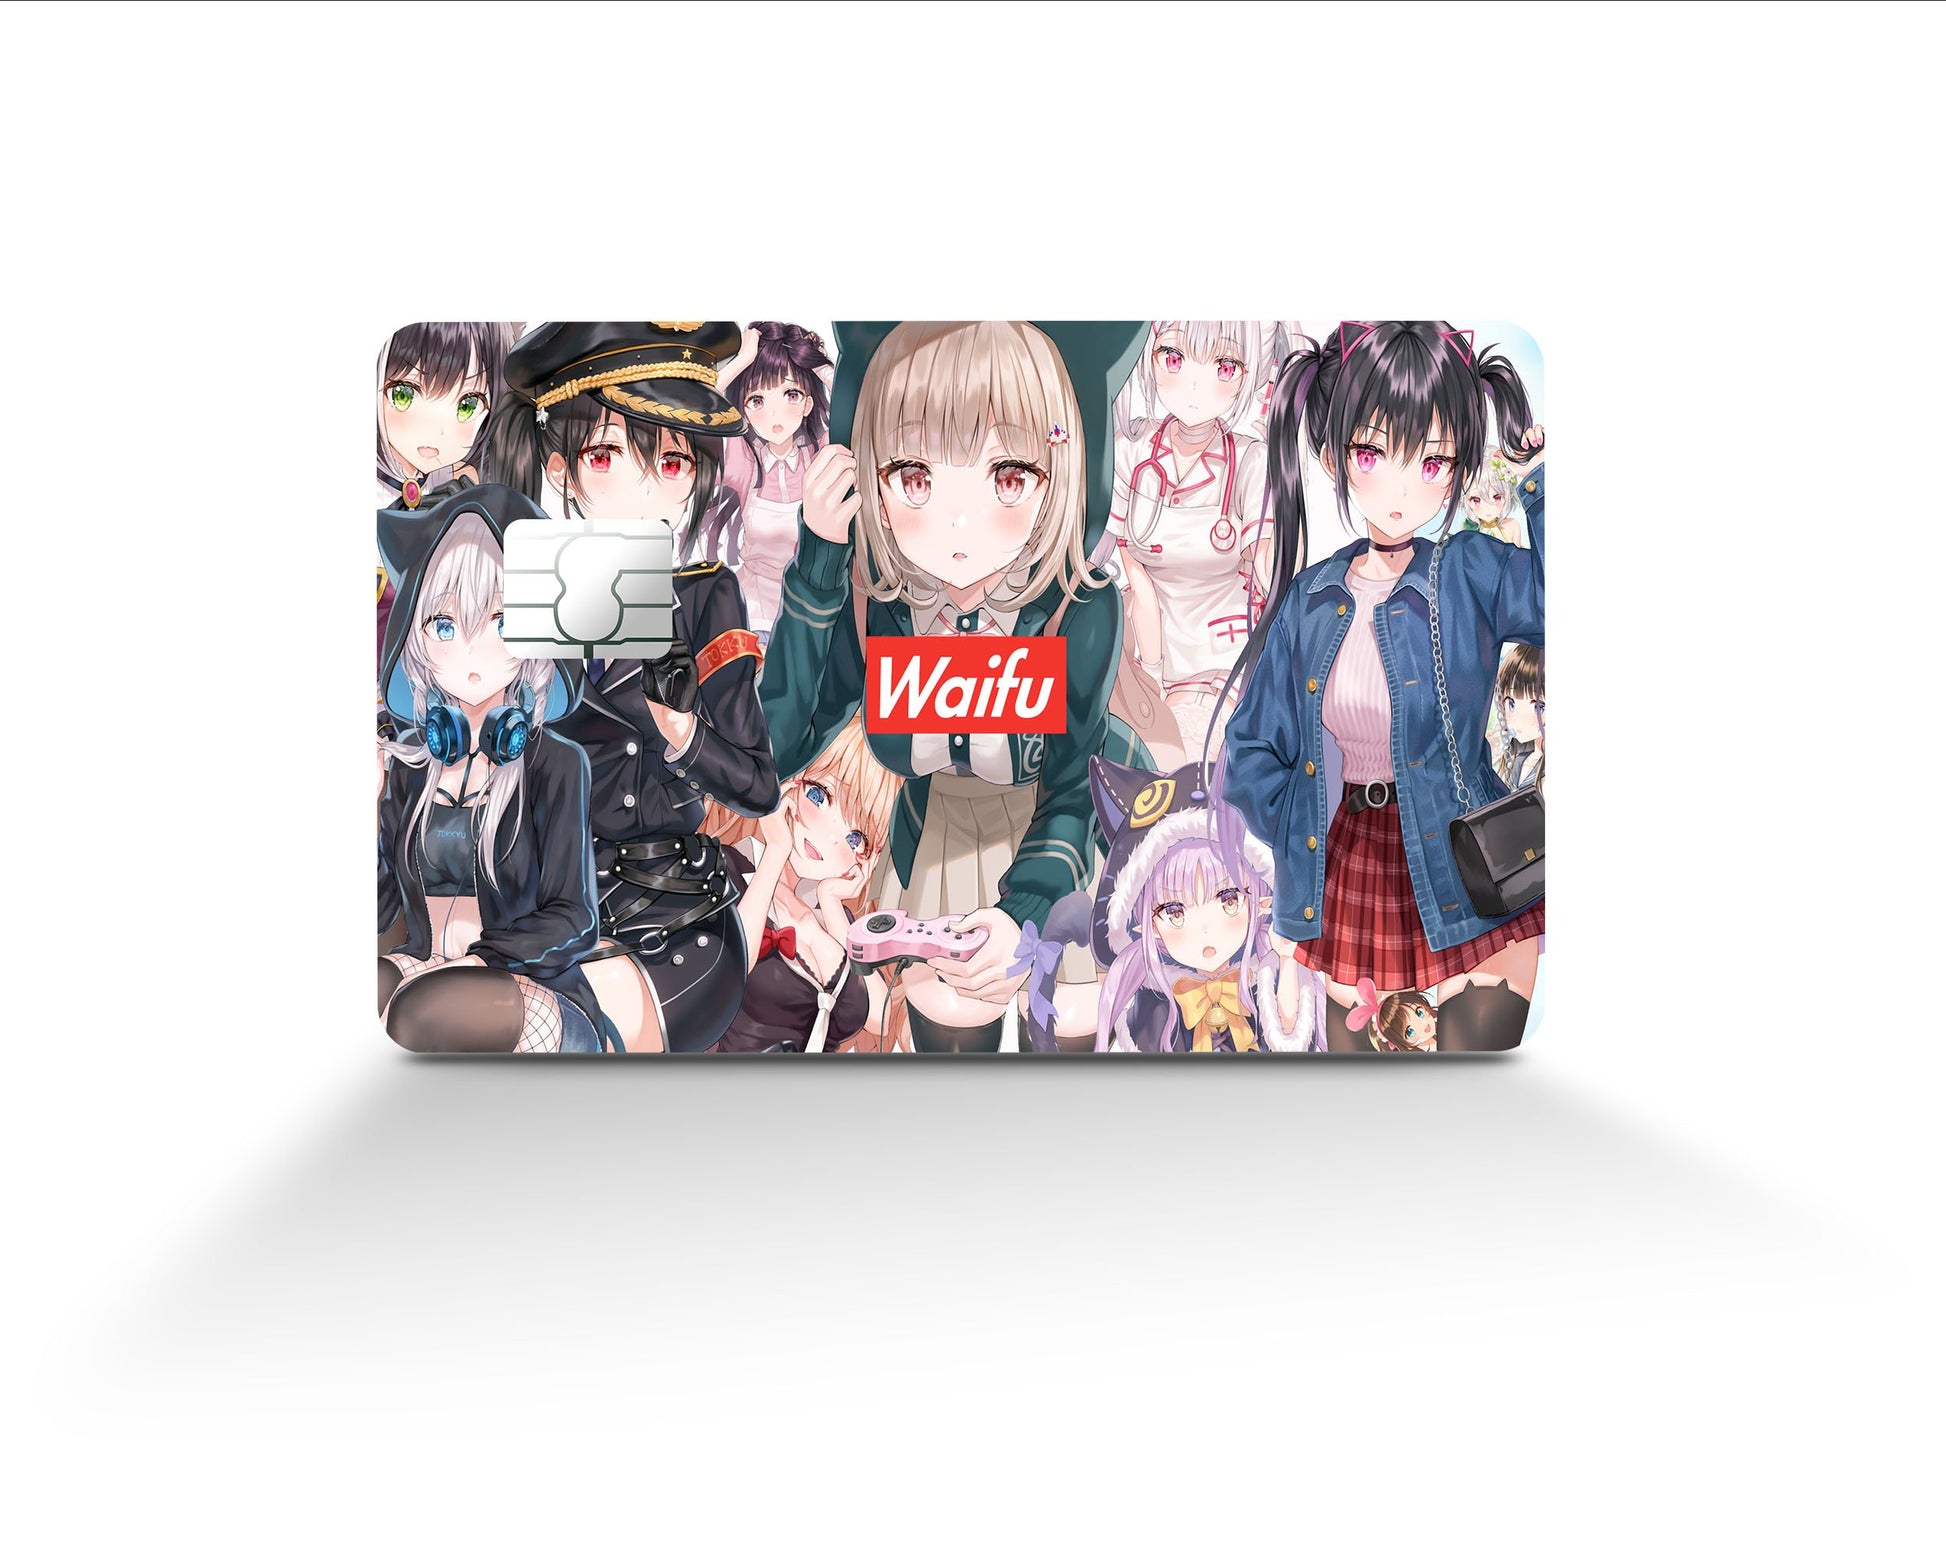  Holographic Credit Card Skin Sticker Cover/Anime Style Debit  Cards Stickers Decal (2) : Office Products